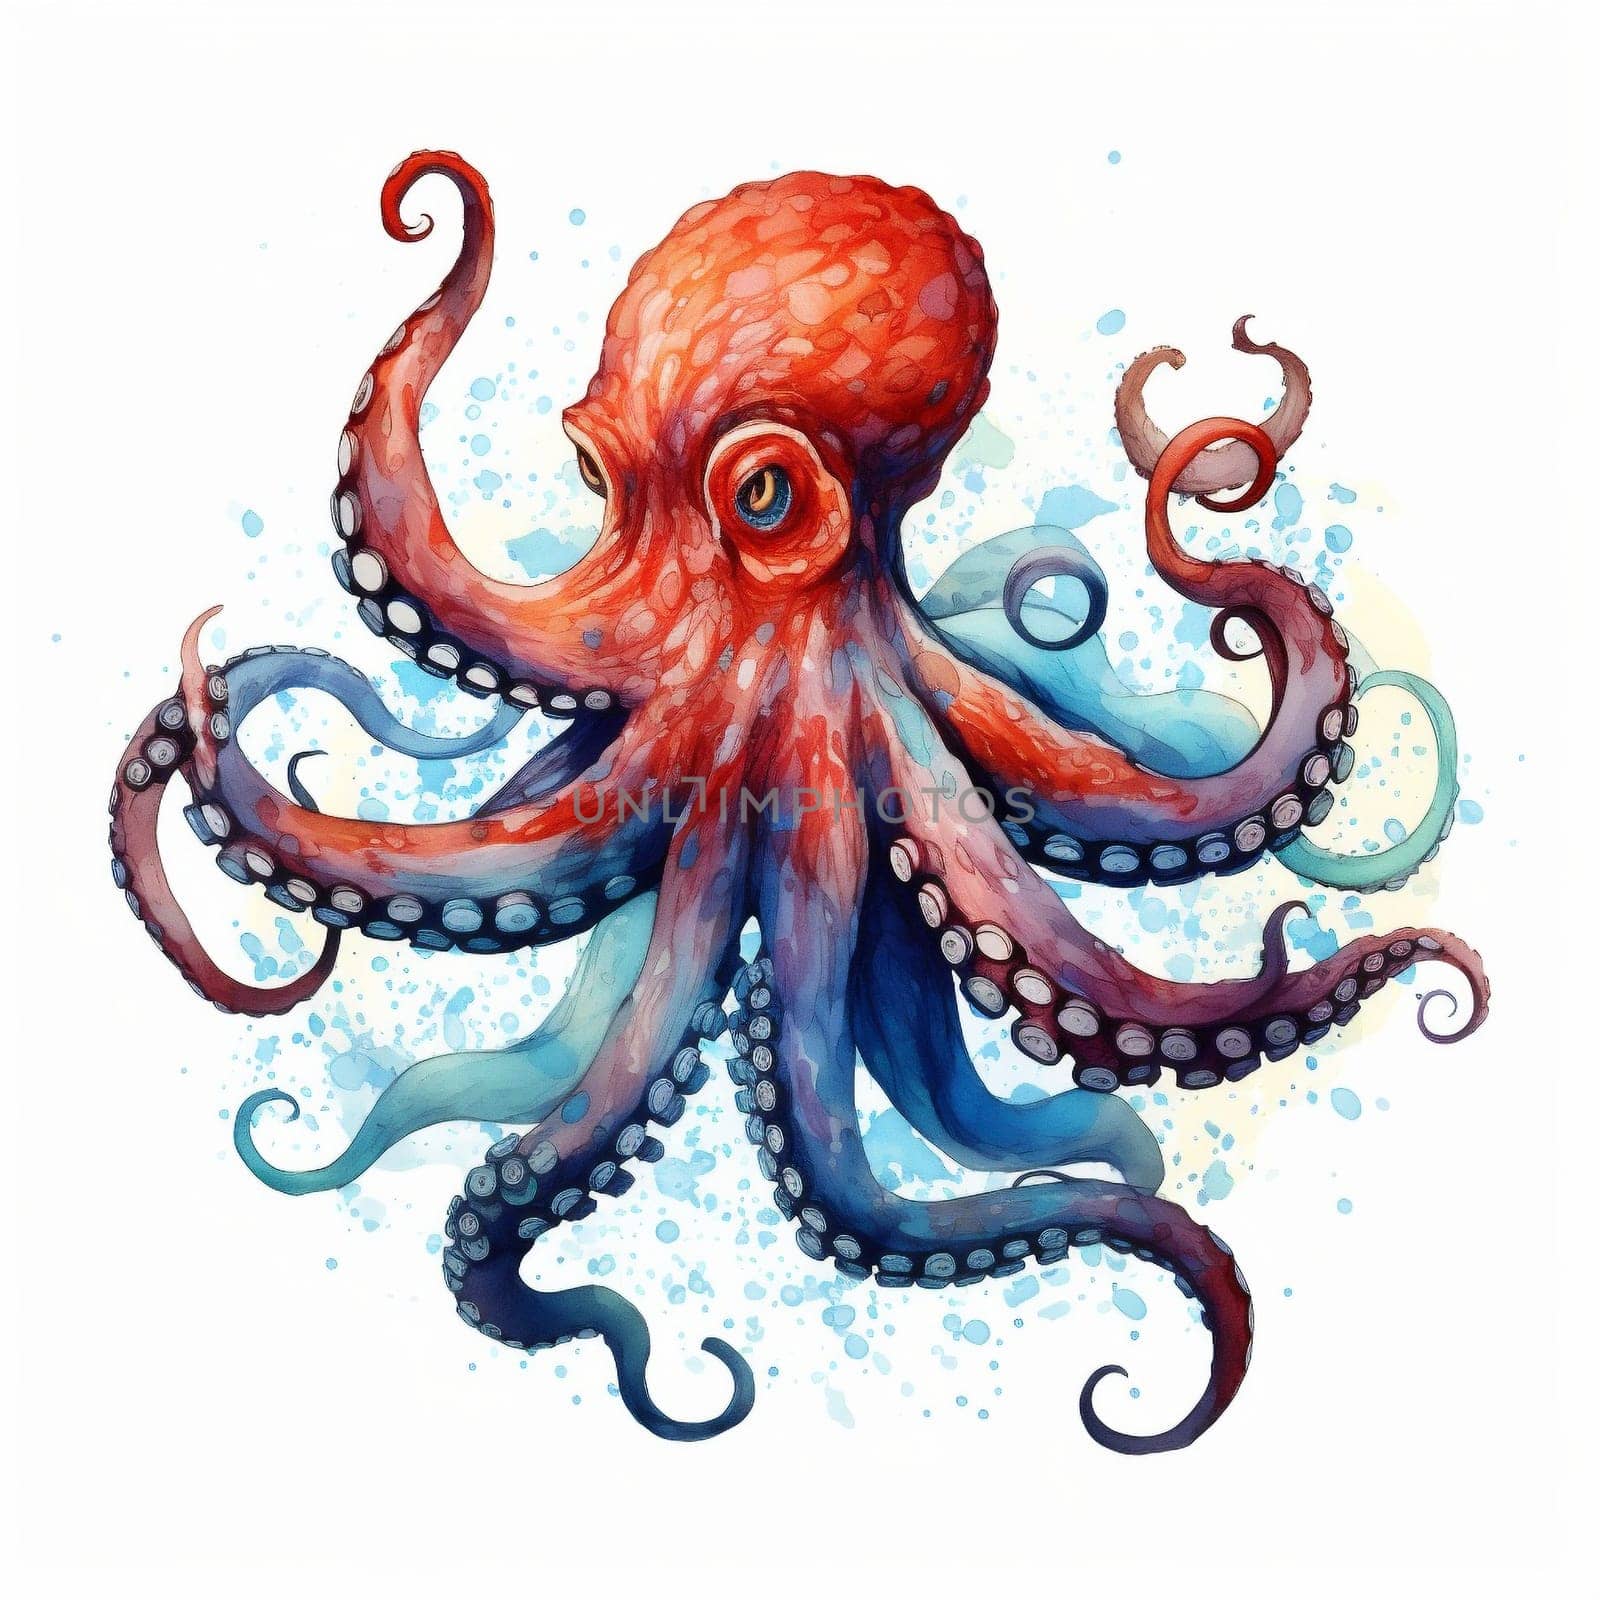 Giant pacific octopus. Watercolor ocean creature illustration isolated on a white background. by Rina_Dozornaya